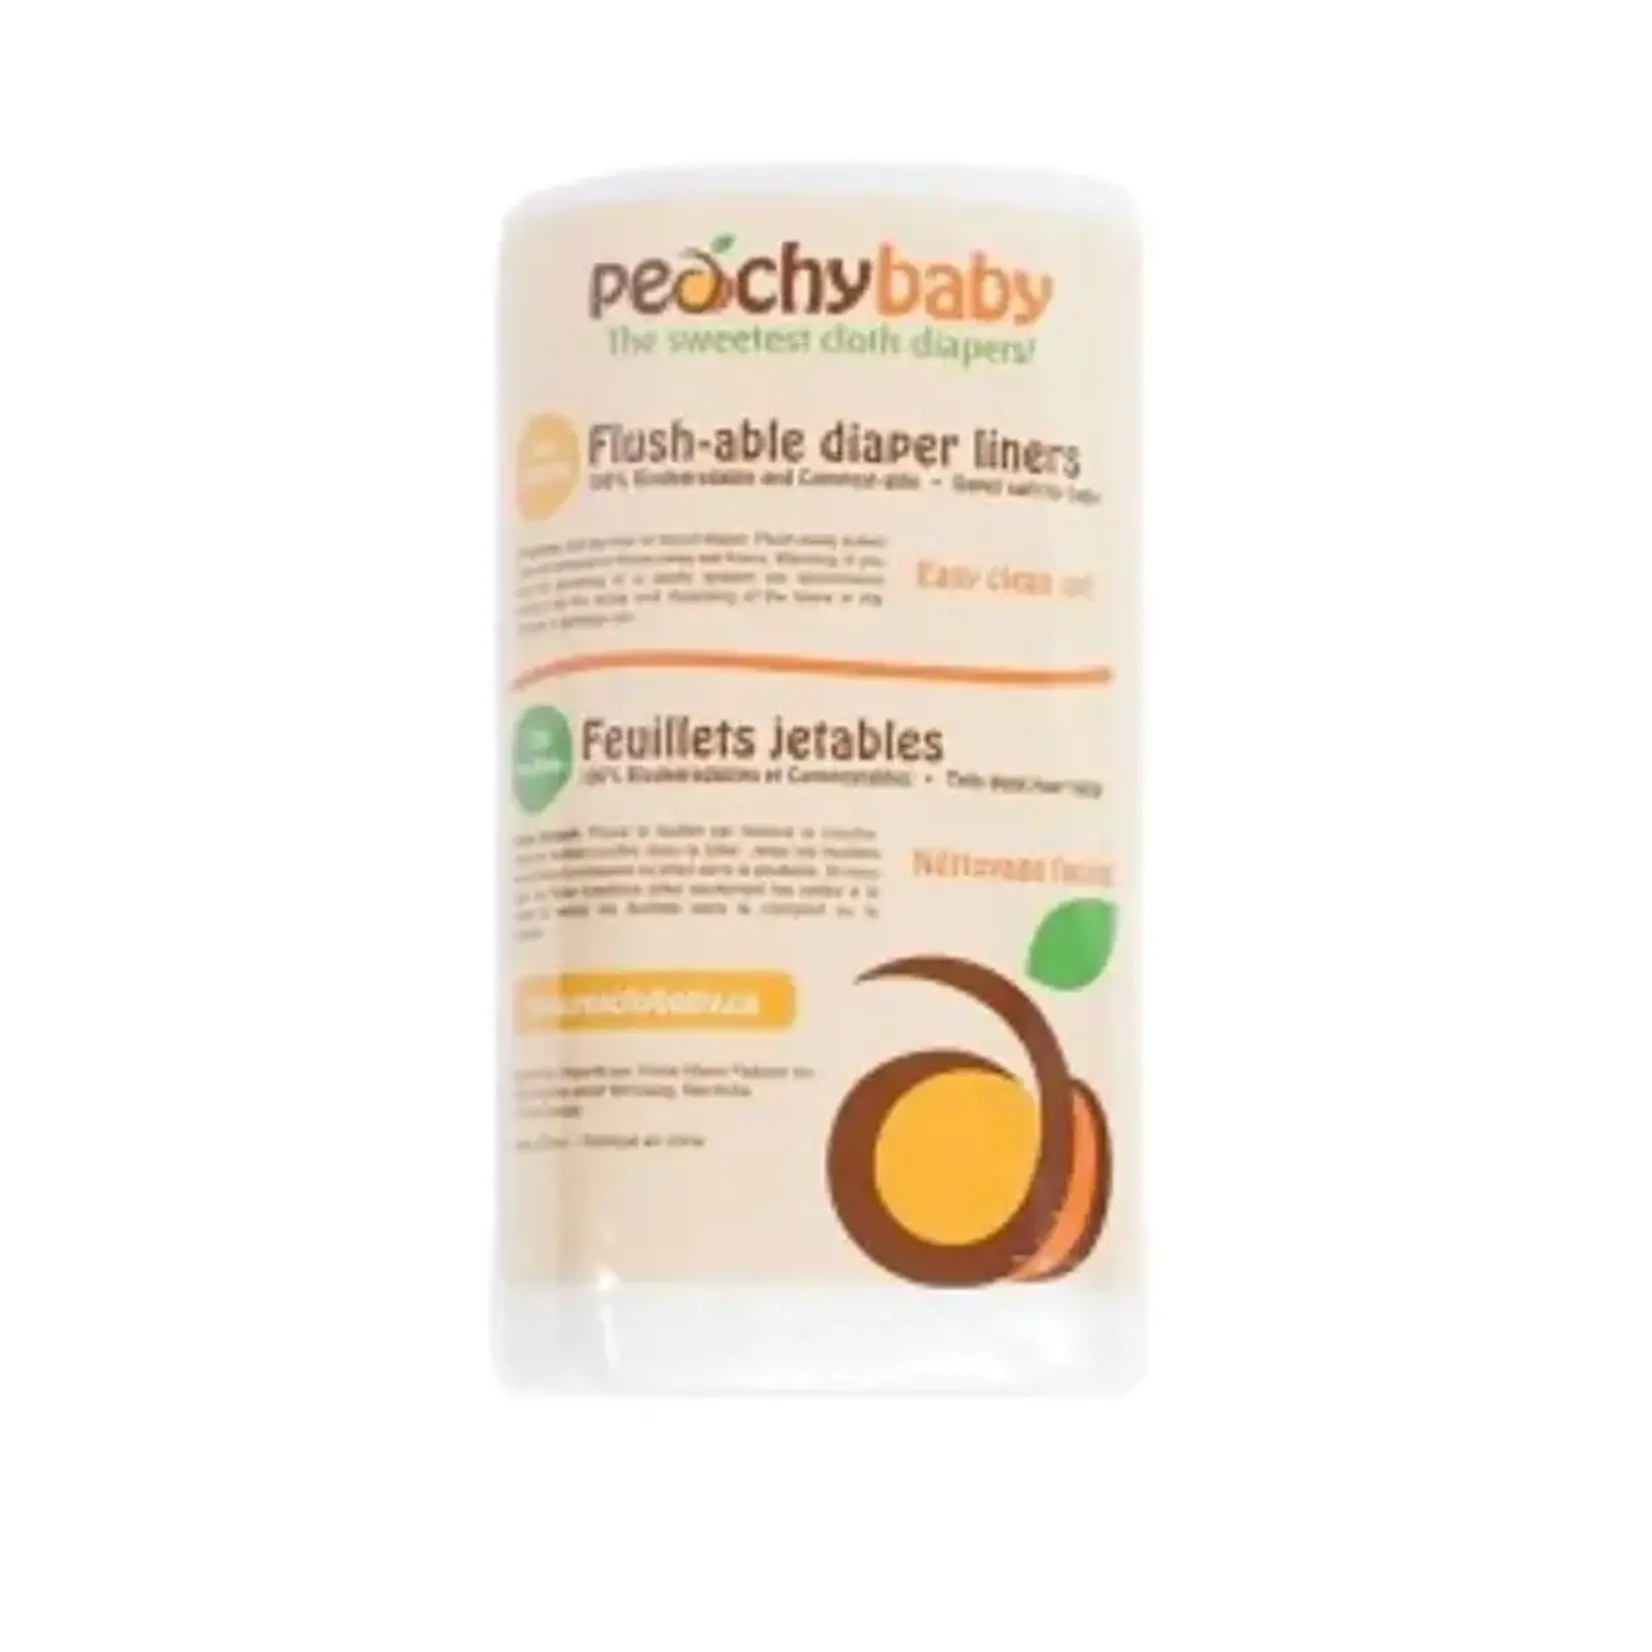 AMP Diapers AMP DIAPERS PEACHY BABY FLUSHABLE LINERS